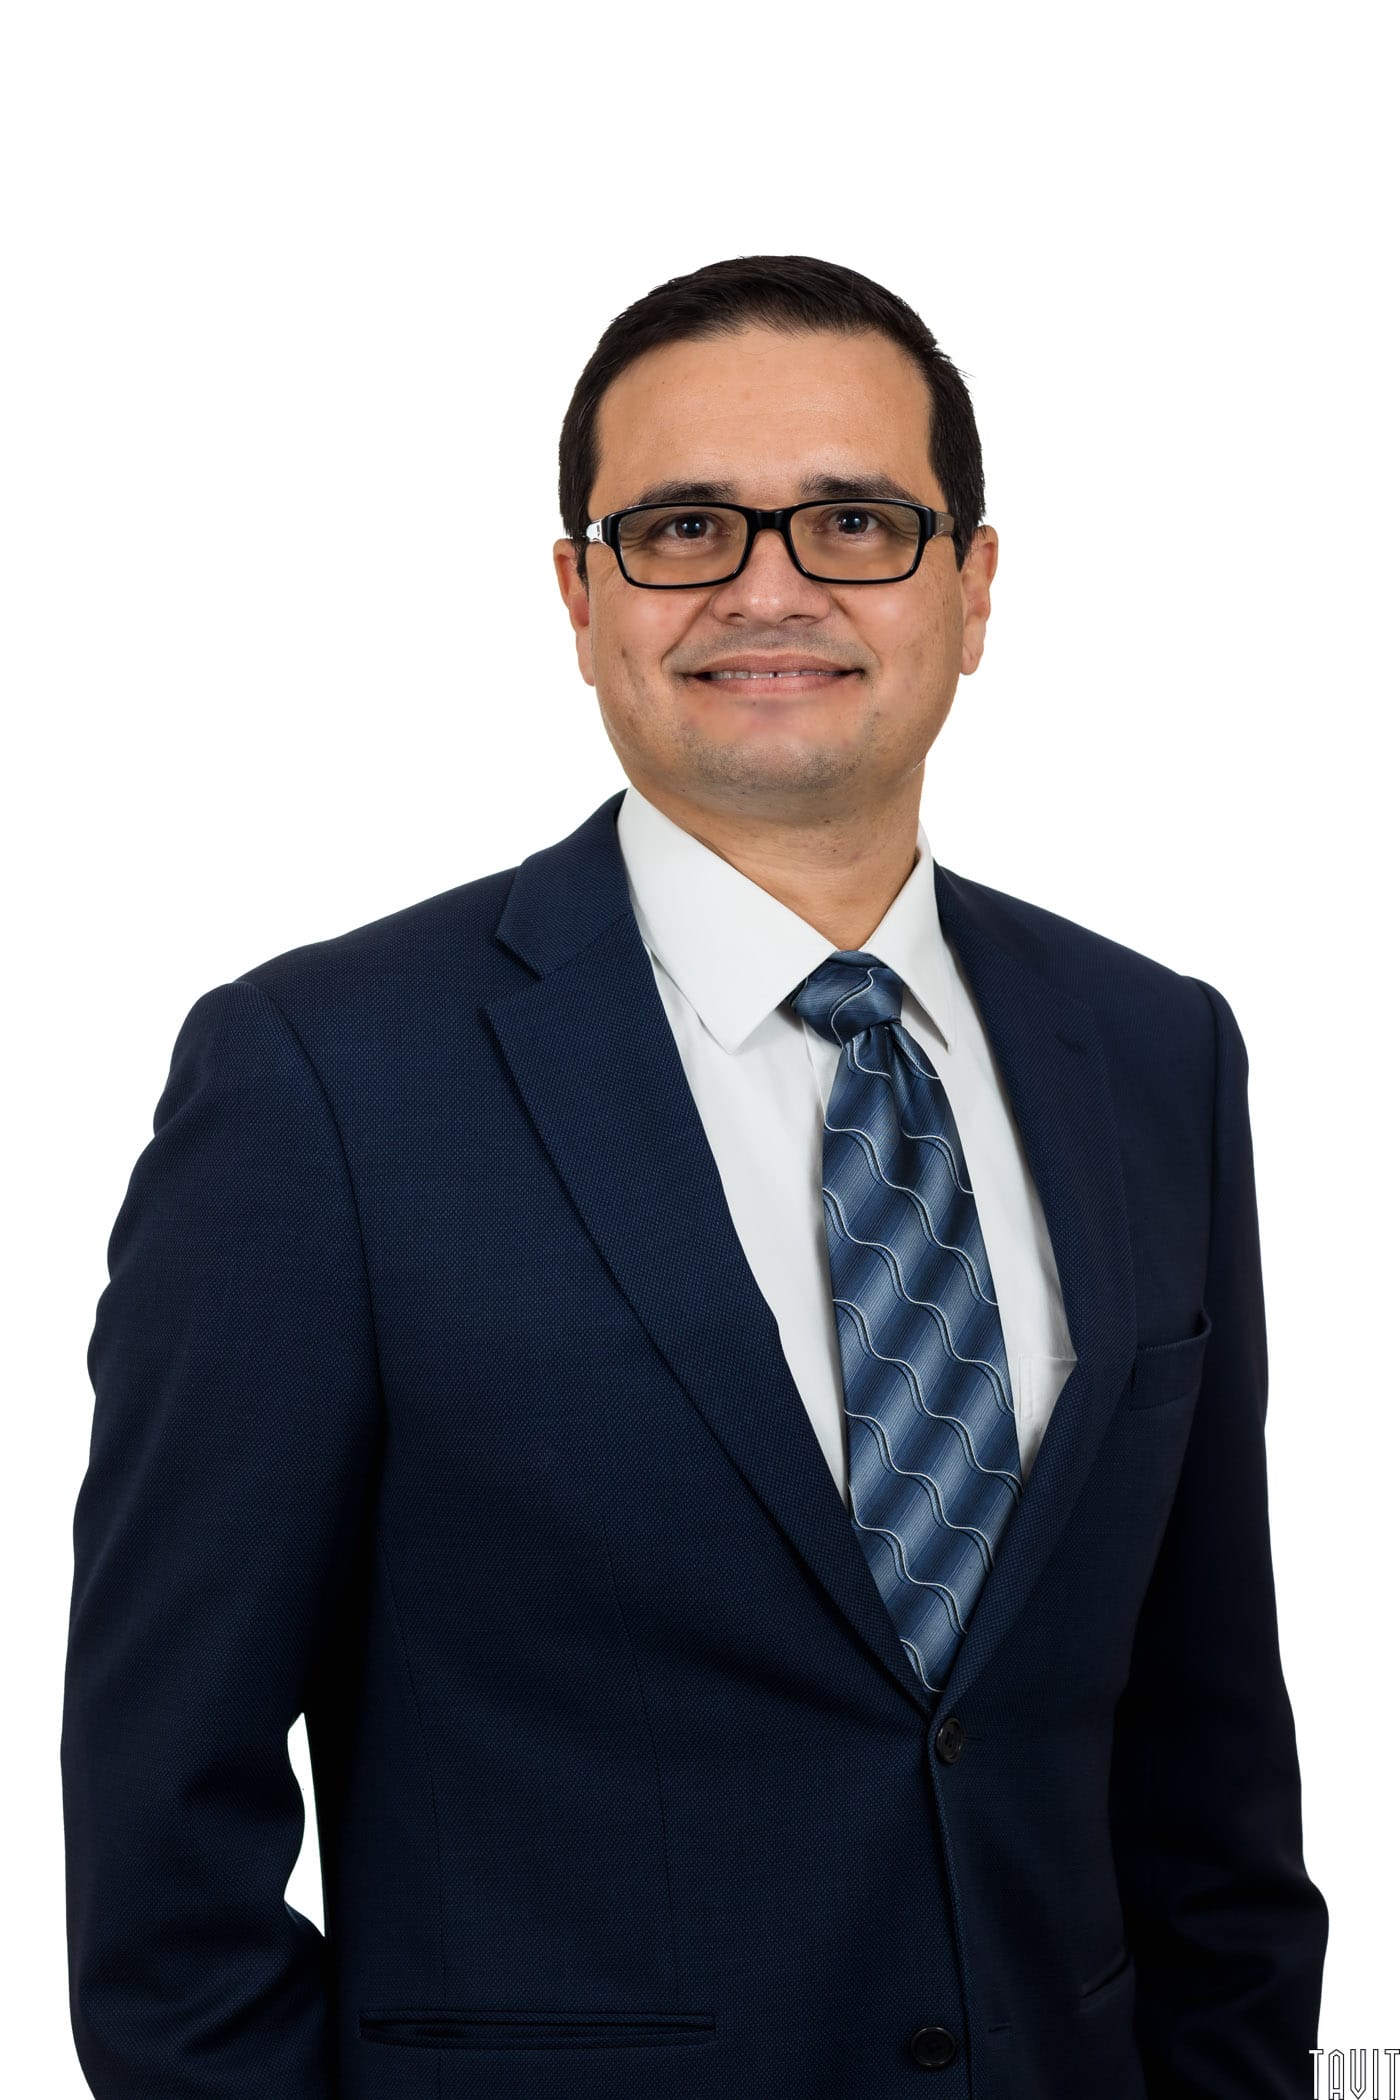 Man in suit and glasses business headshot